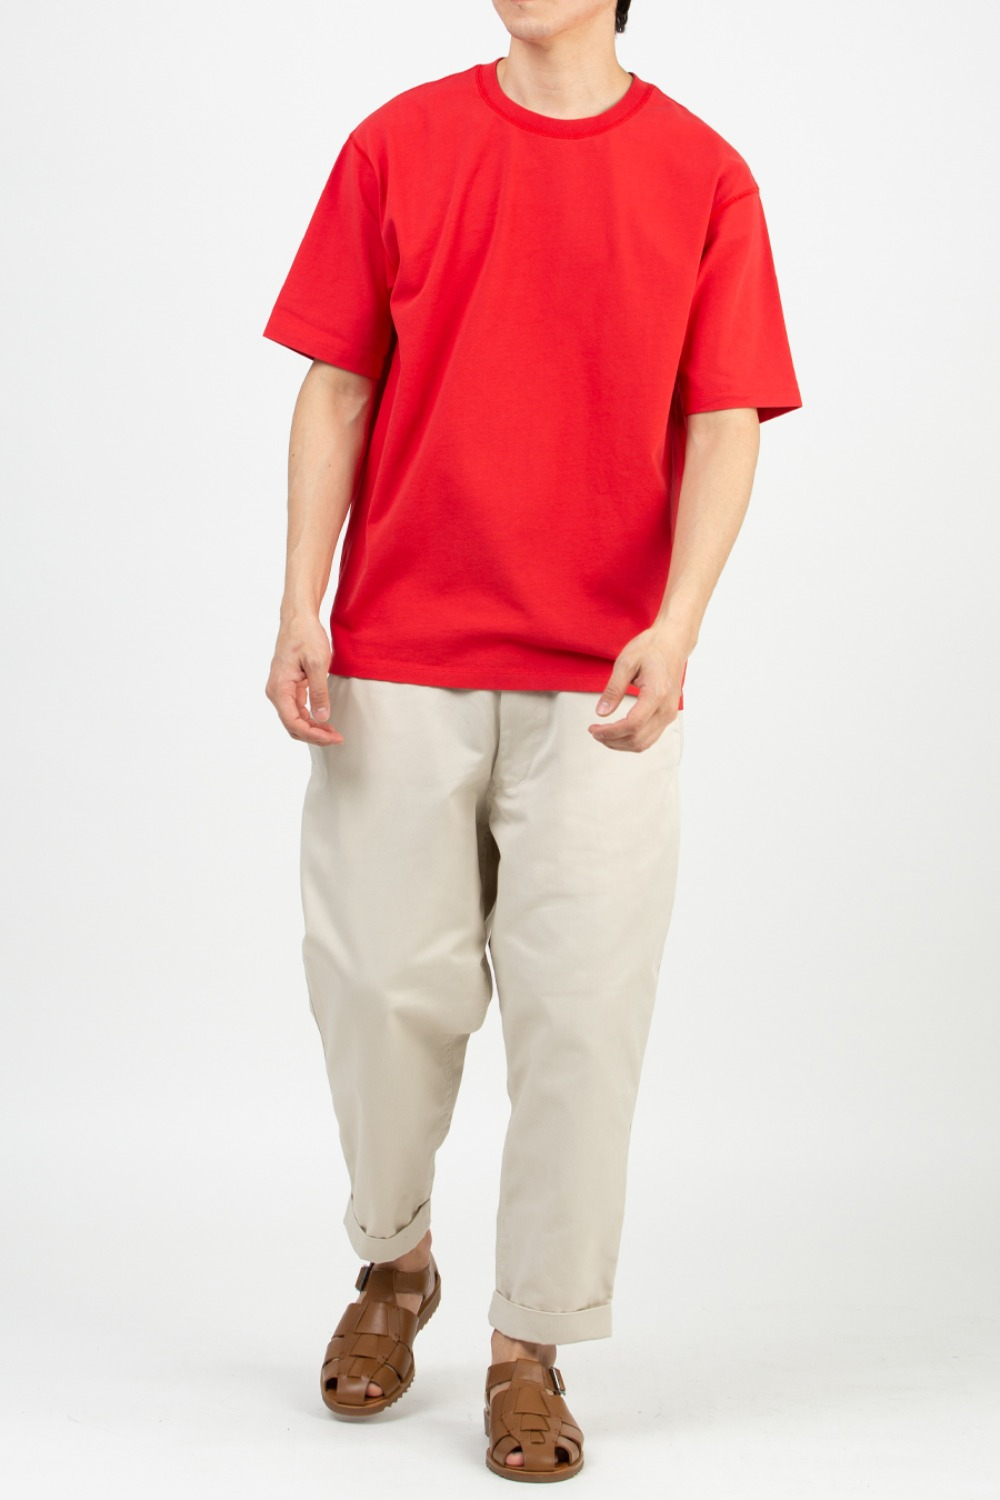 (CARRY OVER) CREW NECK HIKING T-SHIRT WASHED RED COTTON